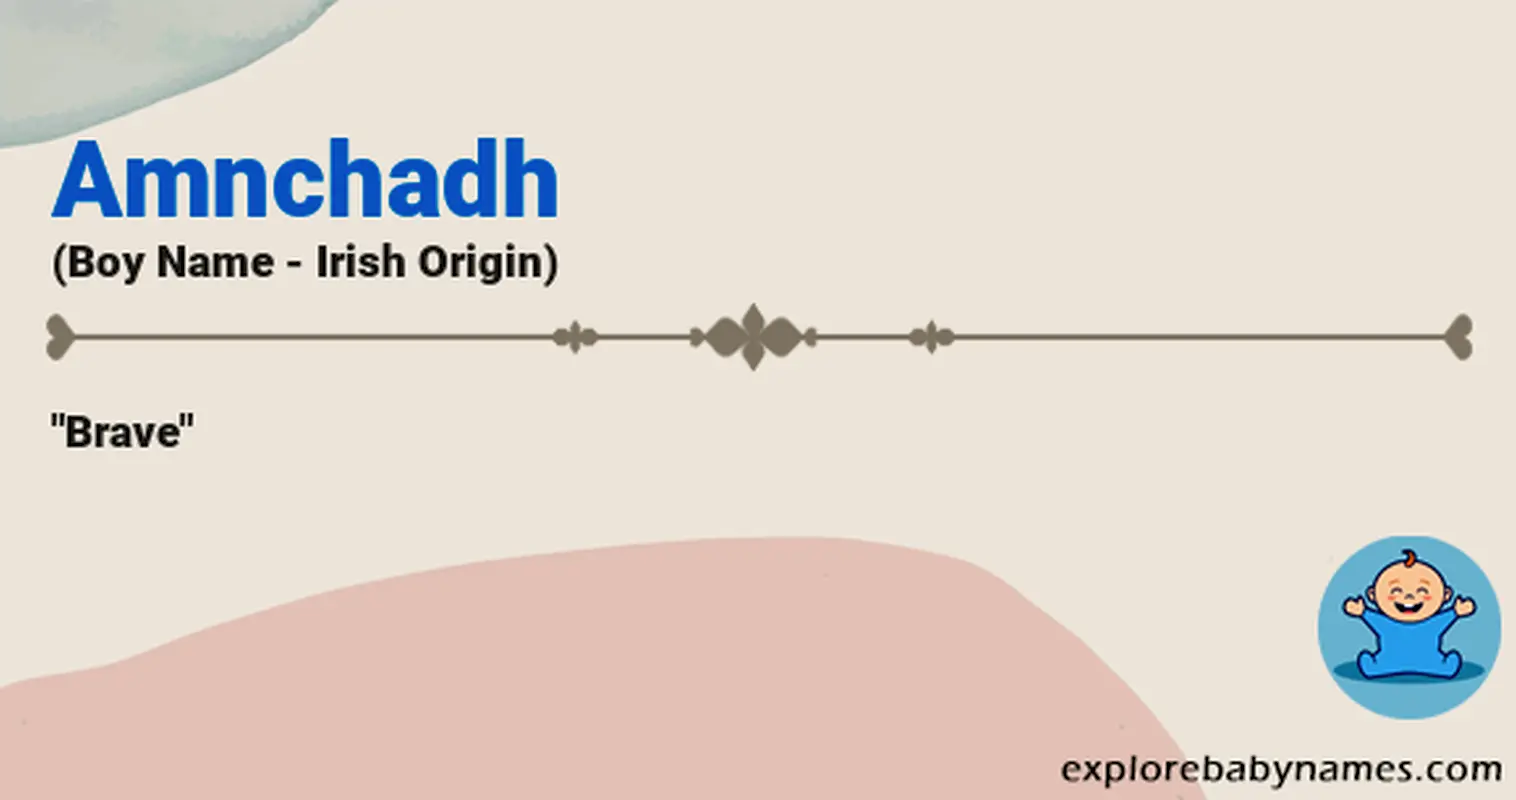 Meaning of Amnchadh